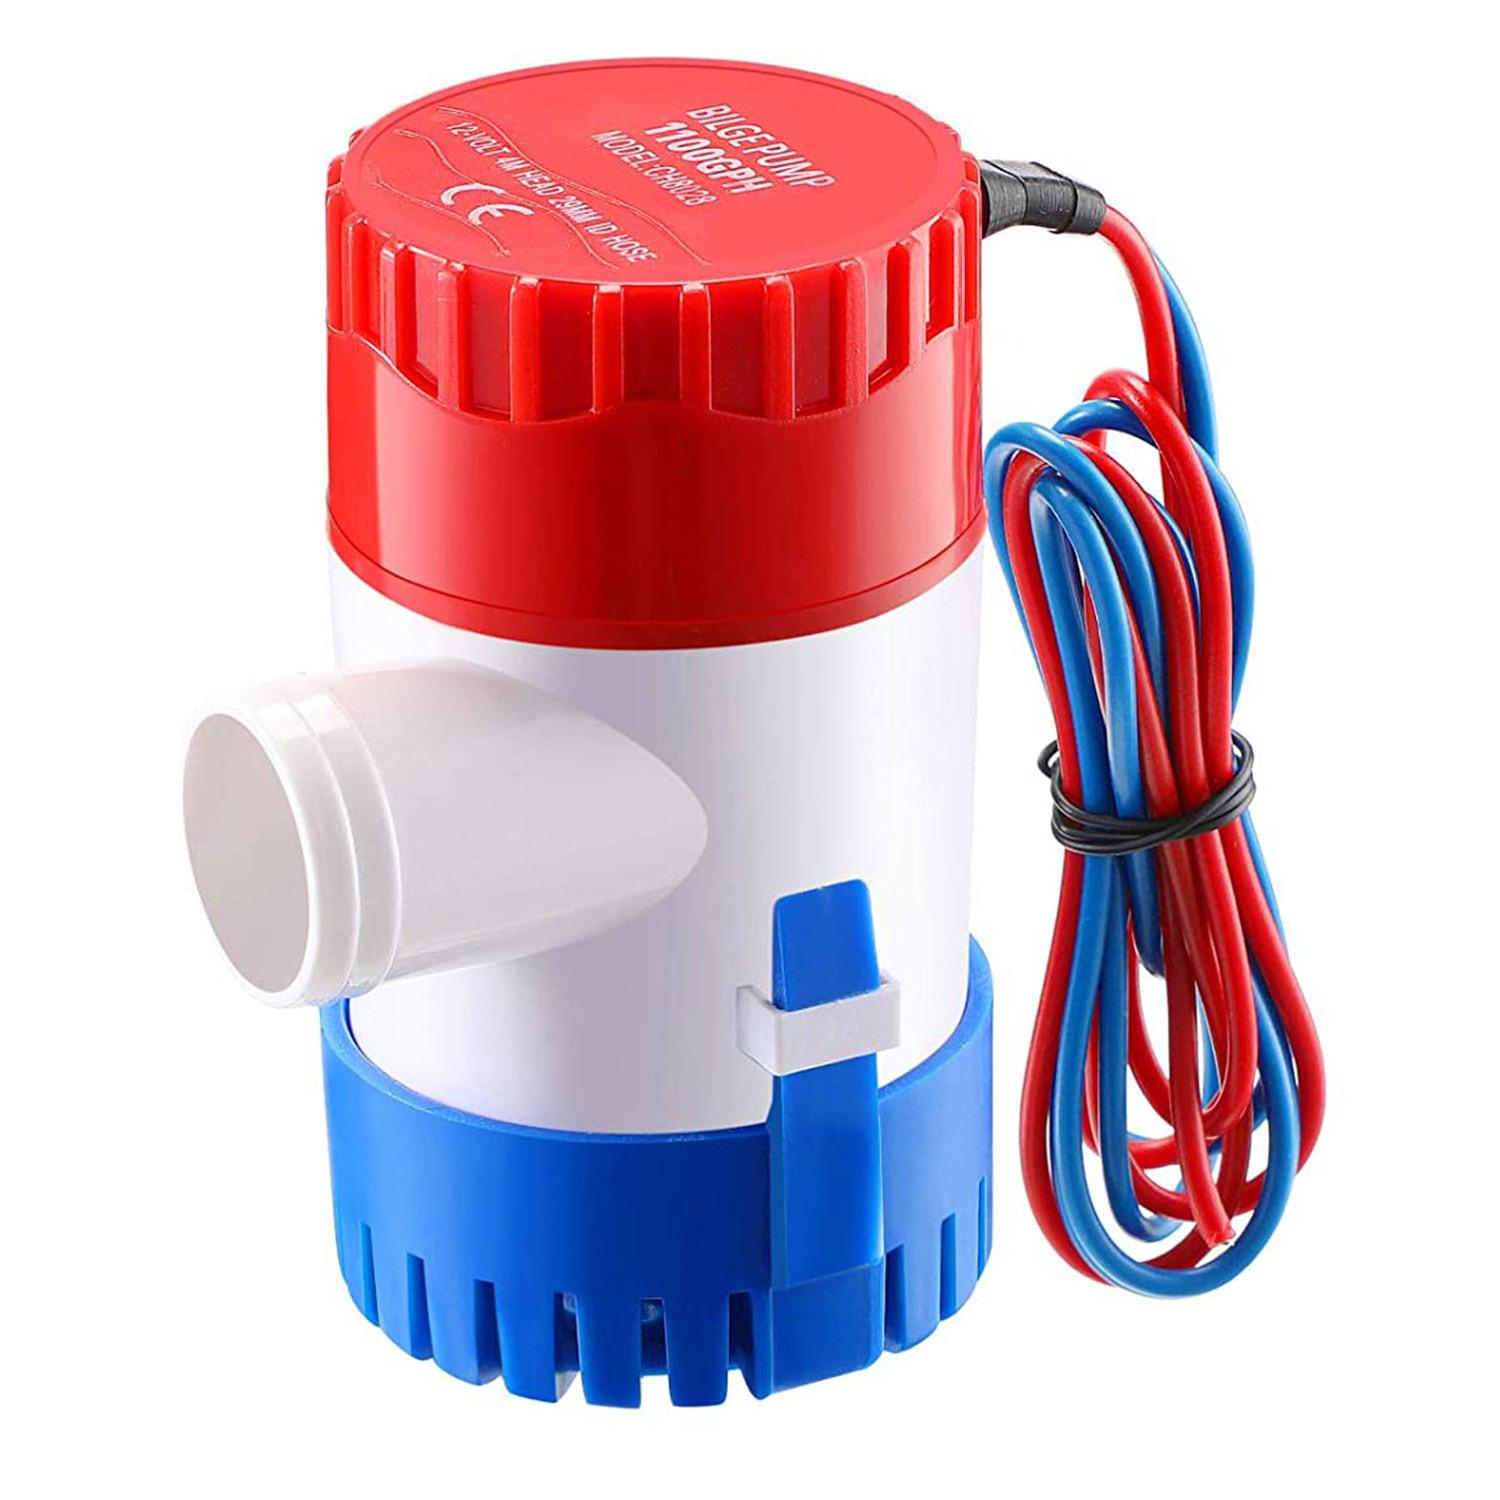 Electric bilge pump with red and blue wires